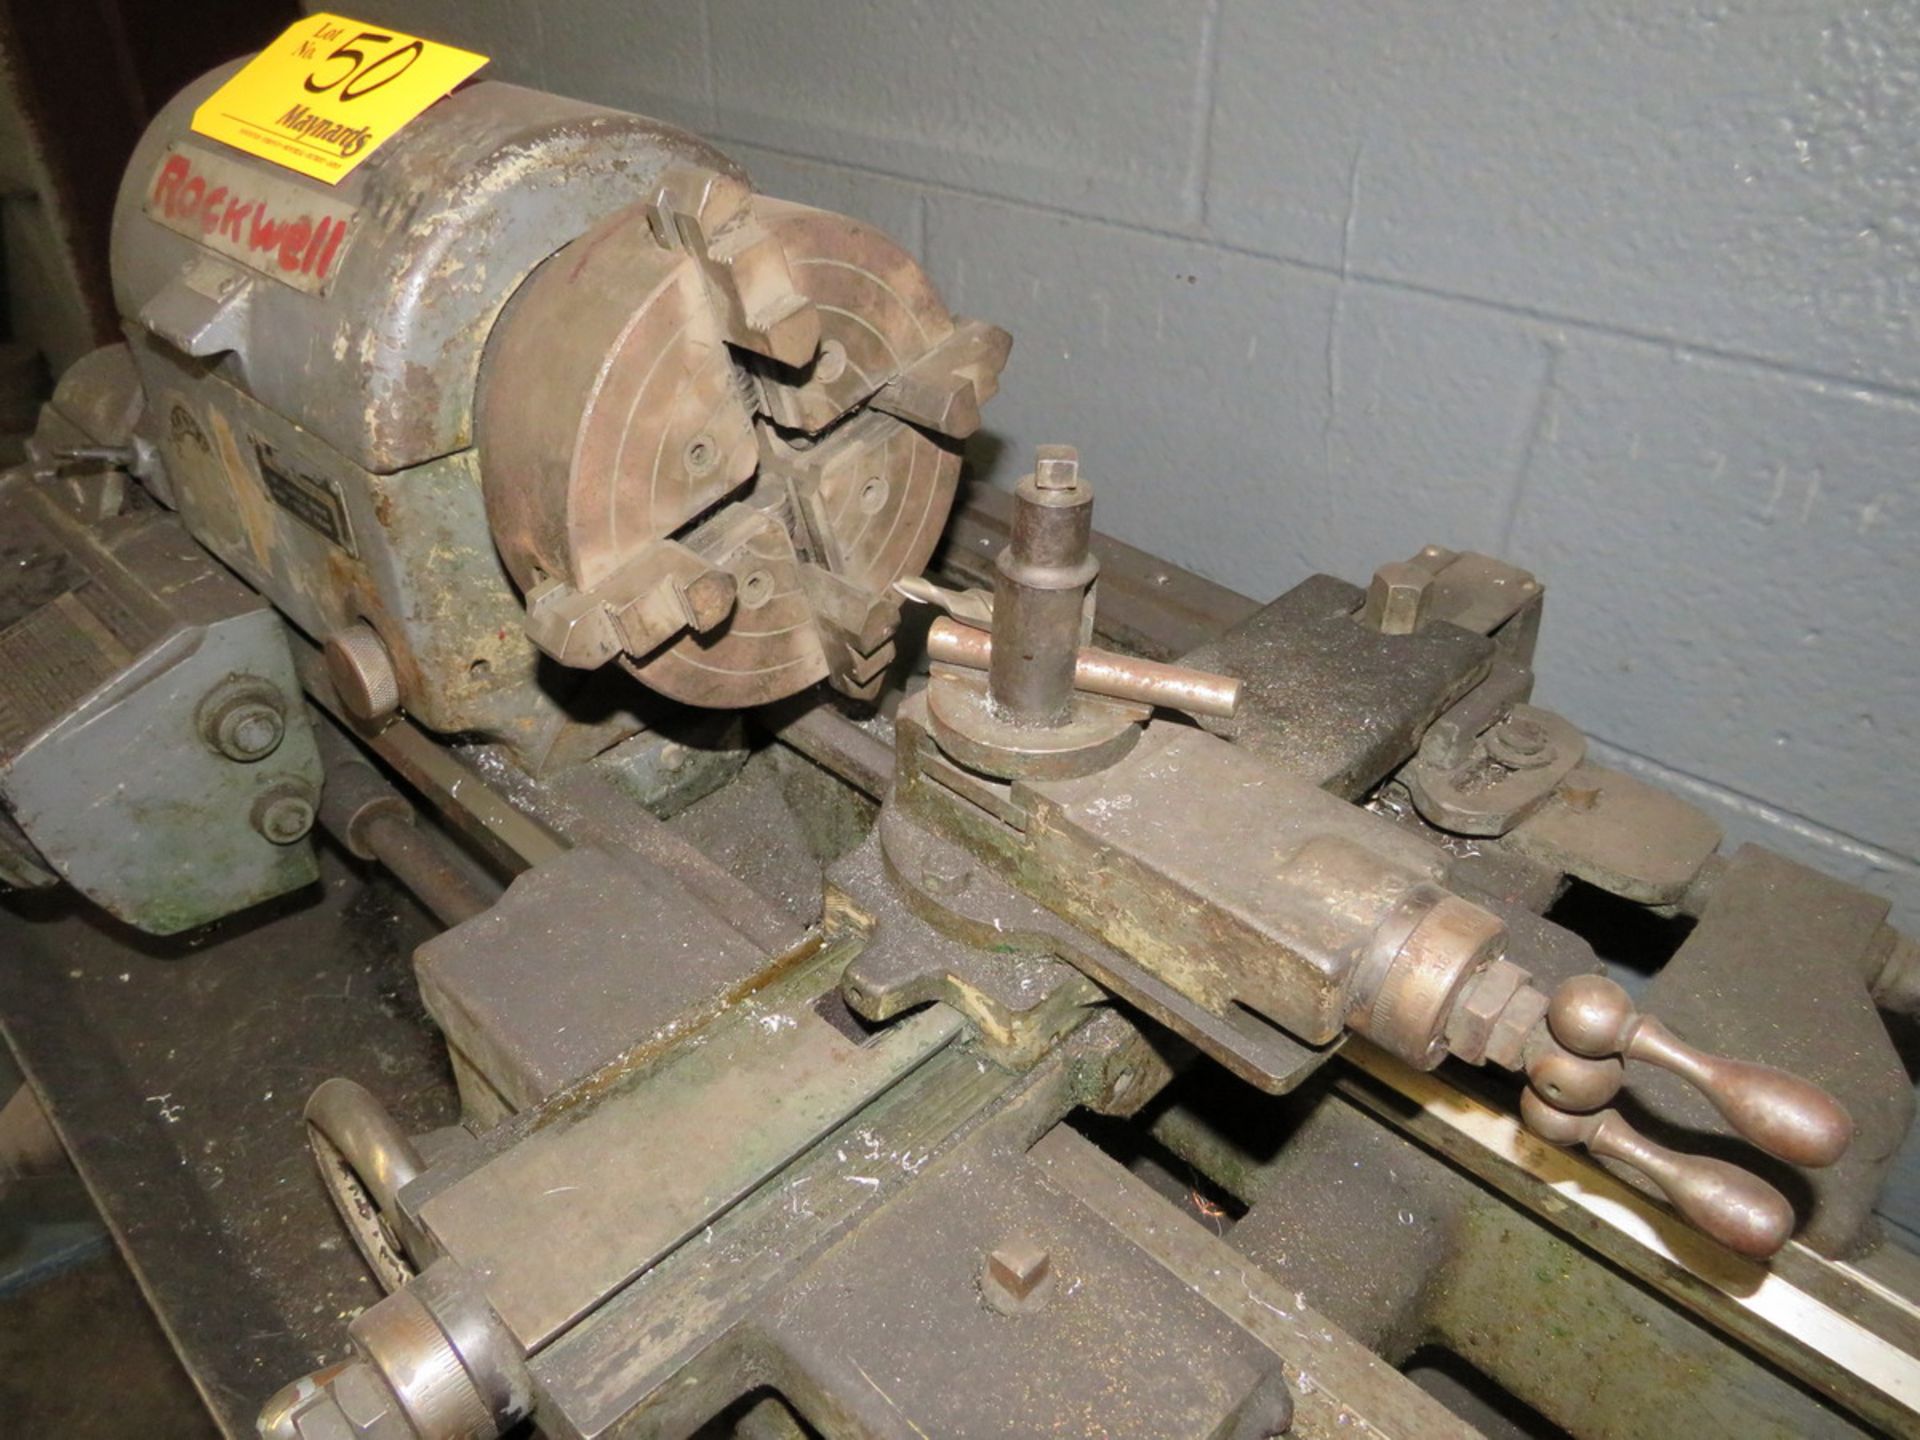 Rockwell Lathe 36" Bed, 1" Through Hole, to Include: Steady Rest, (1) 6" 4-Jaw Chuck, (2) 5" 3-Jaw - Image 3 of 4